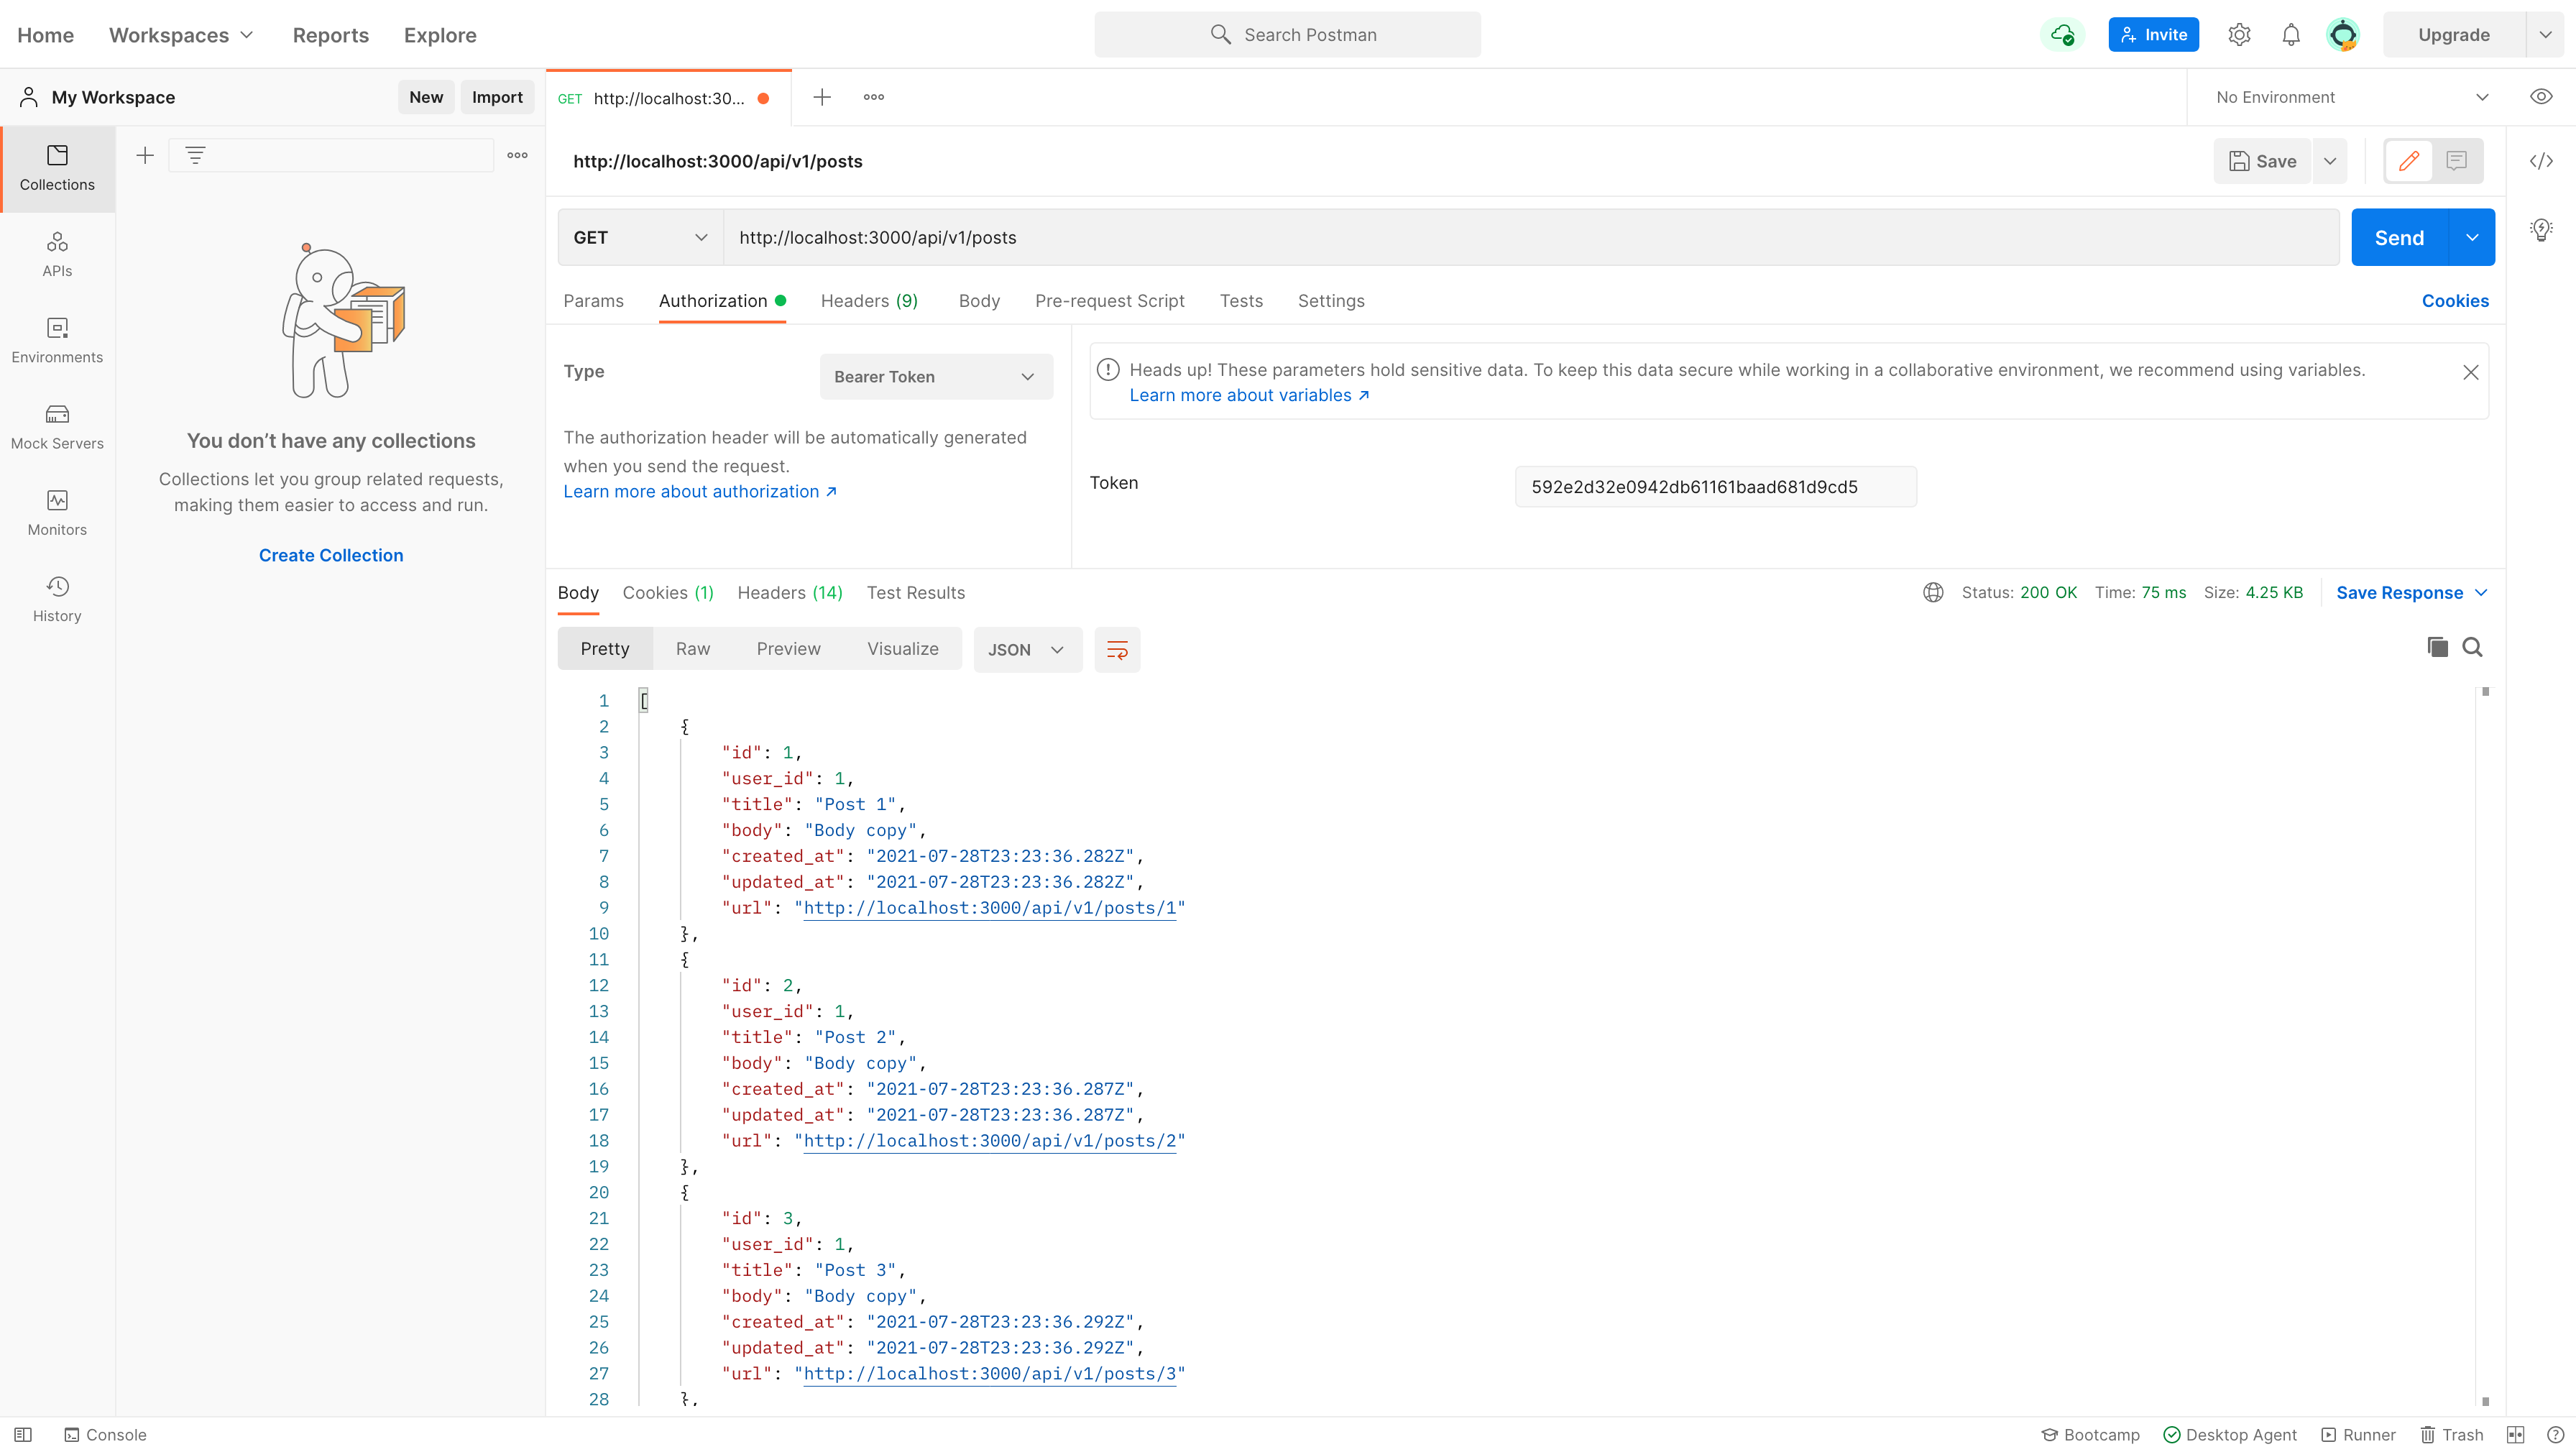 API as viewed from Postman